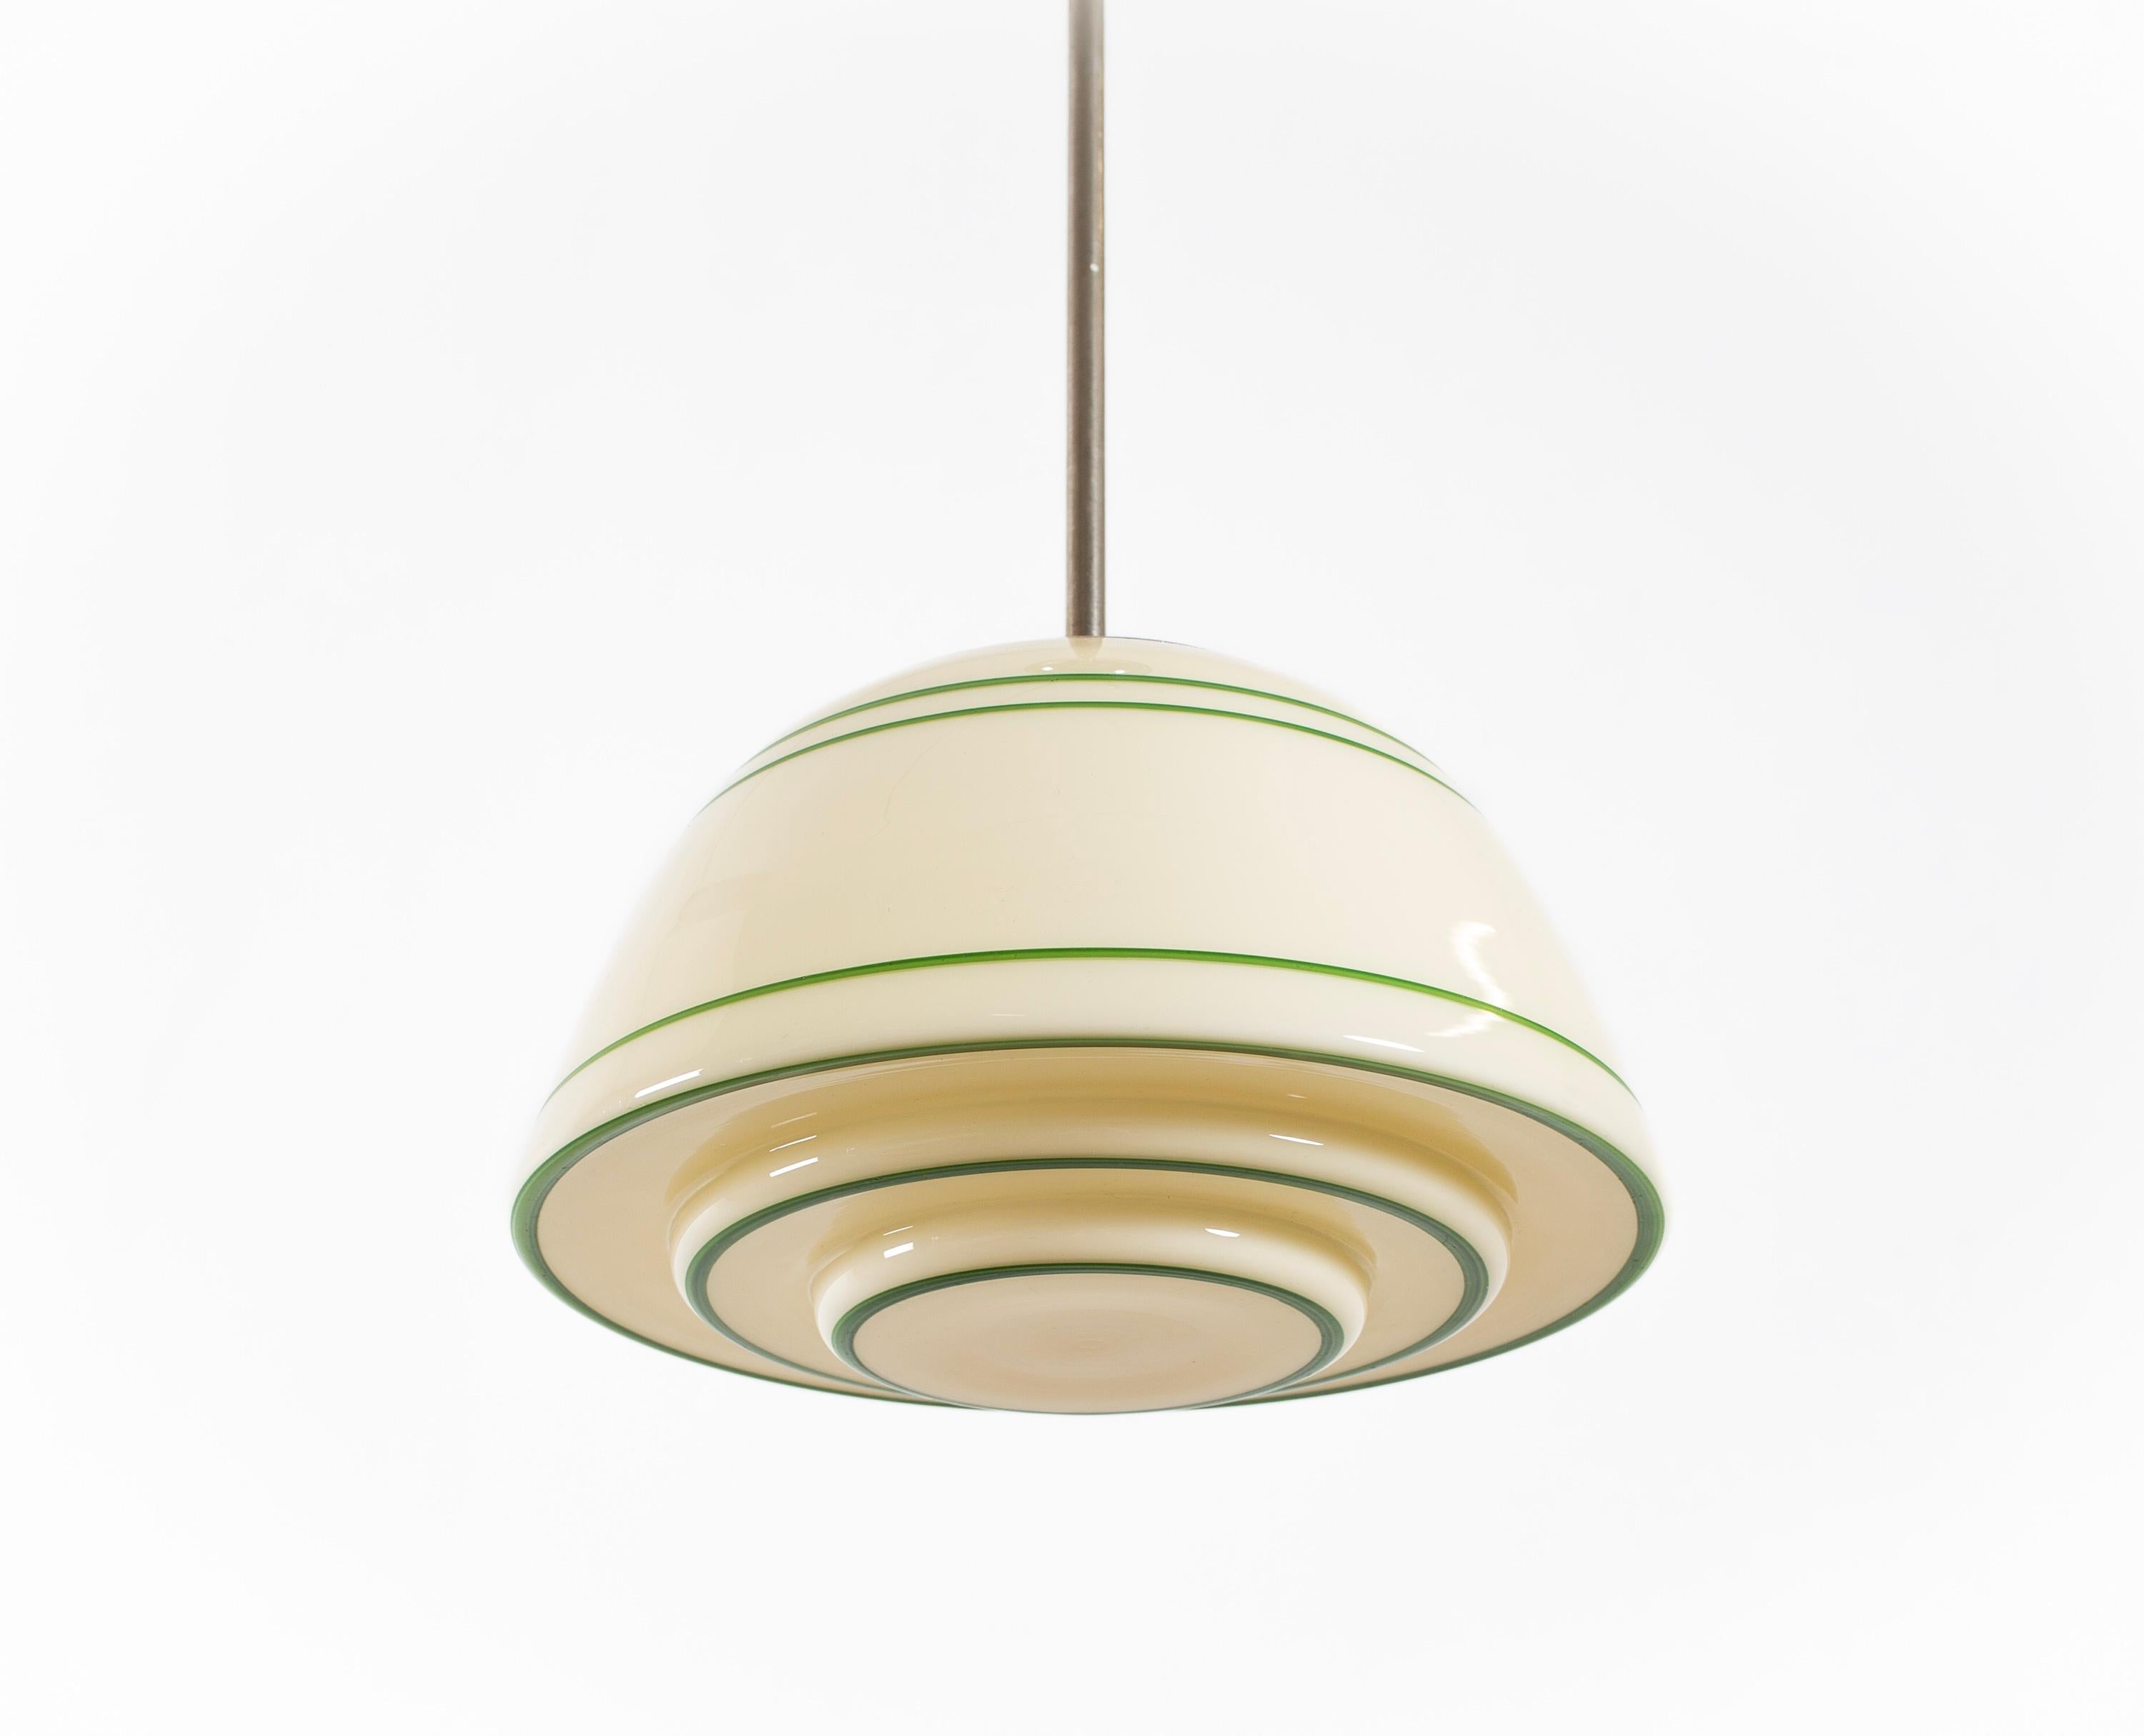 Modernist ceiling light in chrome with decorated shade in blown glass. Designed and made in Norway from cirka 1950s second half. The lamp is fully working and in good vintage condition. It is fitted with one E27 bulb holder (works in the US), with a